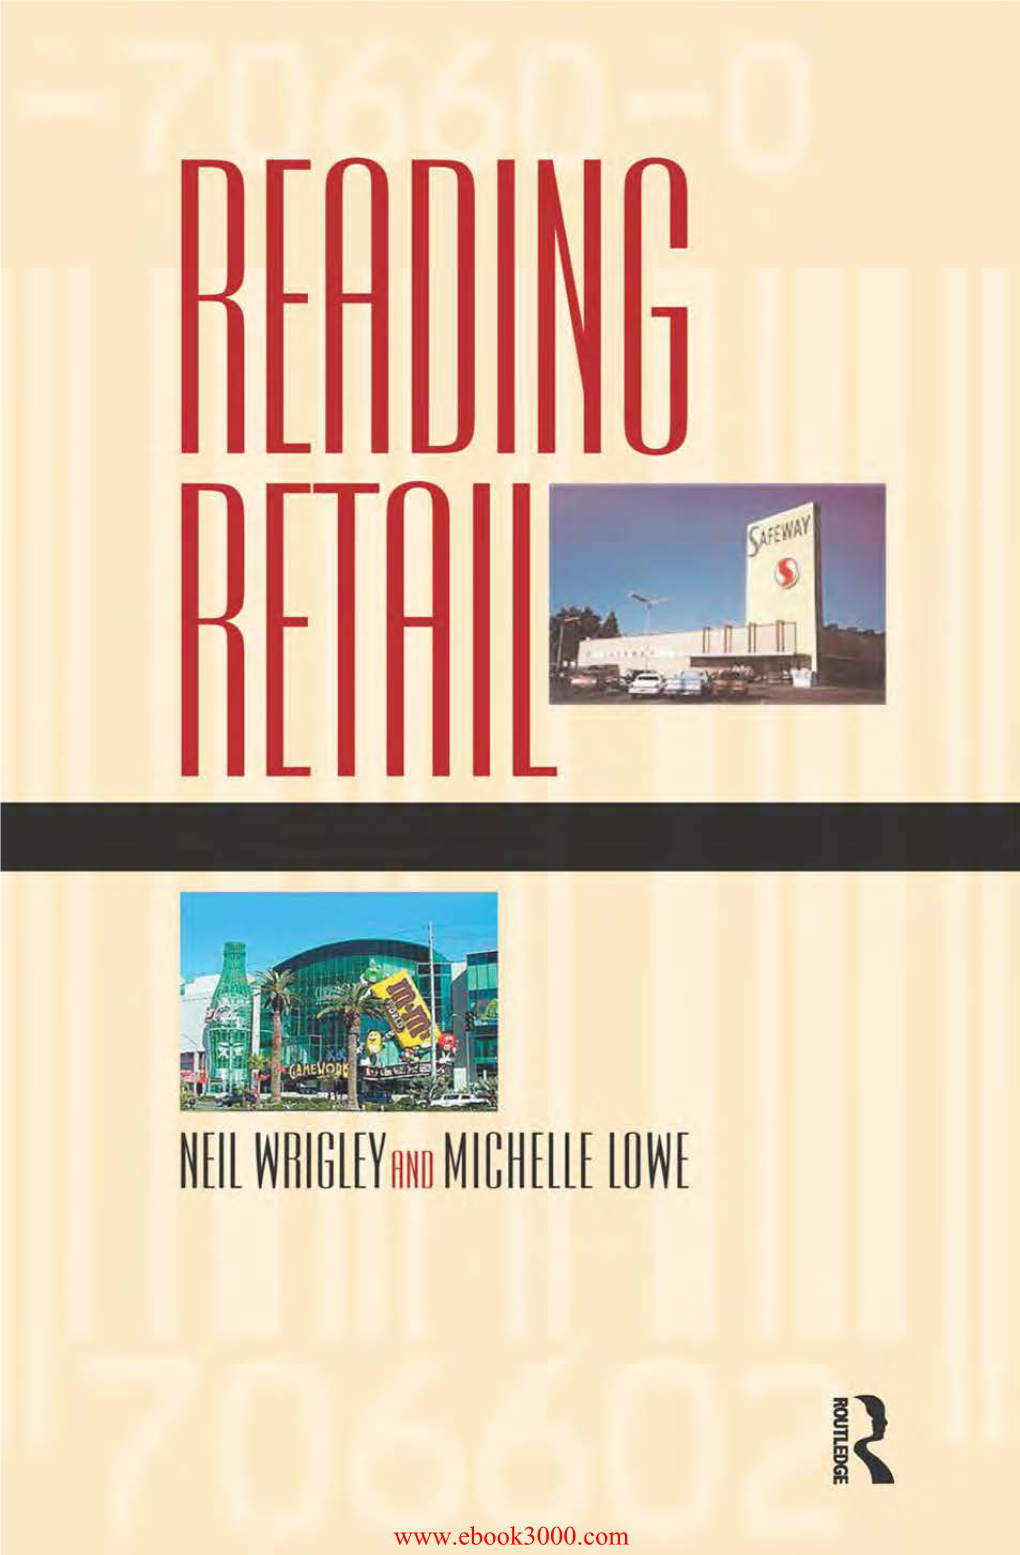 The Inconstant Geography and Spatial Switching of Retail Capital